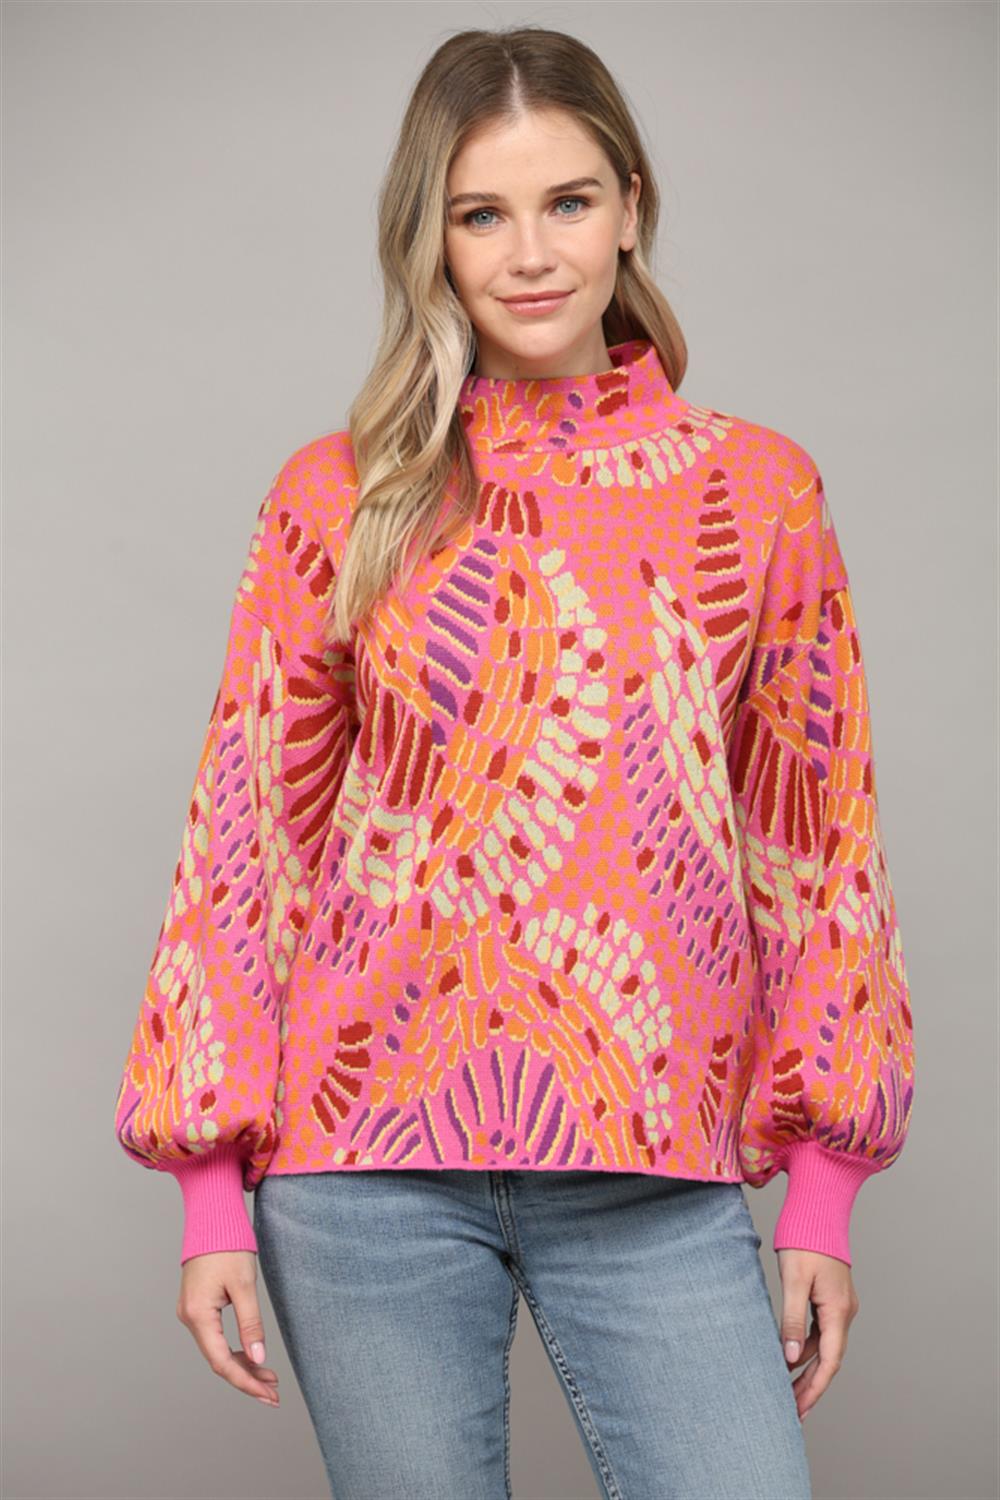 Hot Pink Multi Patterned Sweater